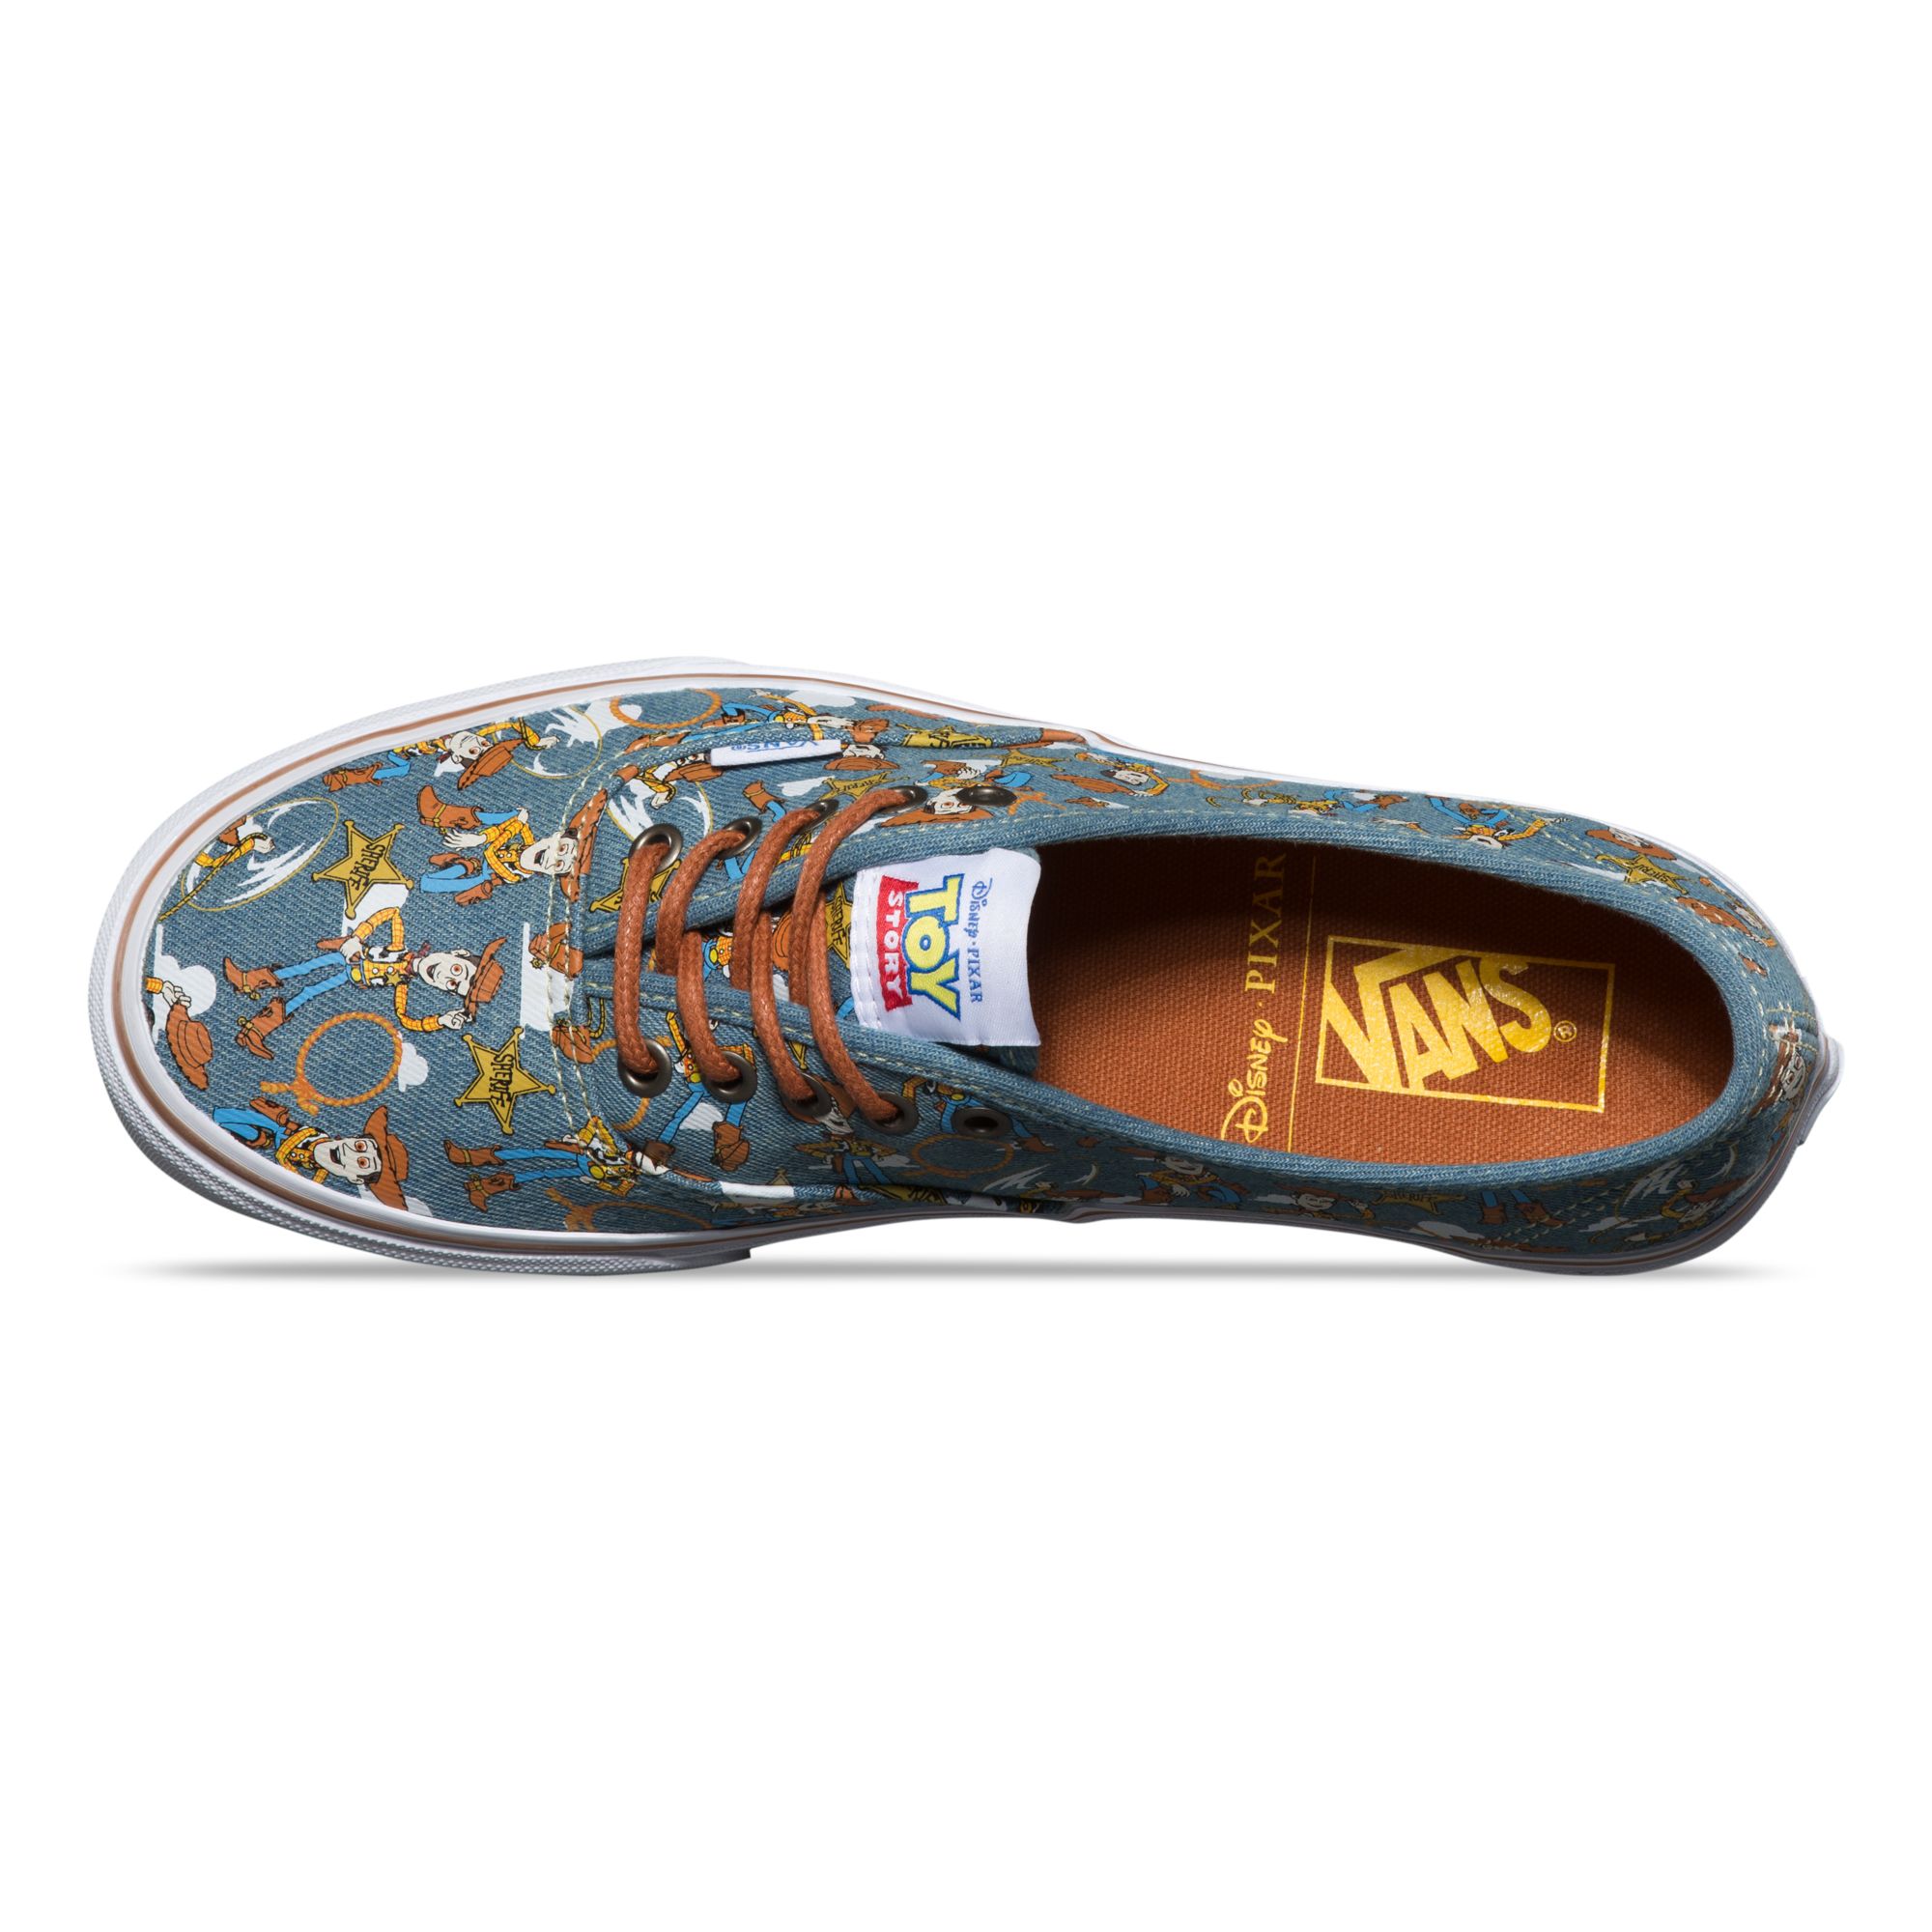 Vans Toy Story Authentic